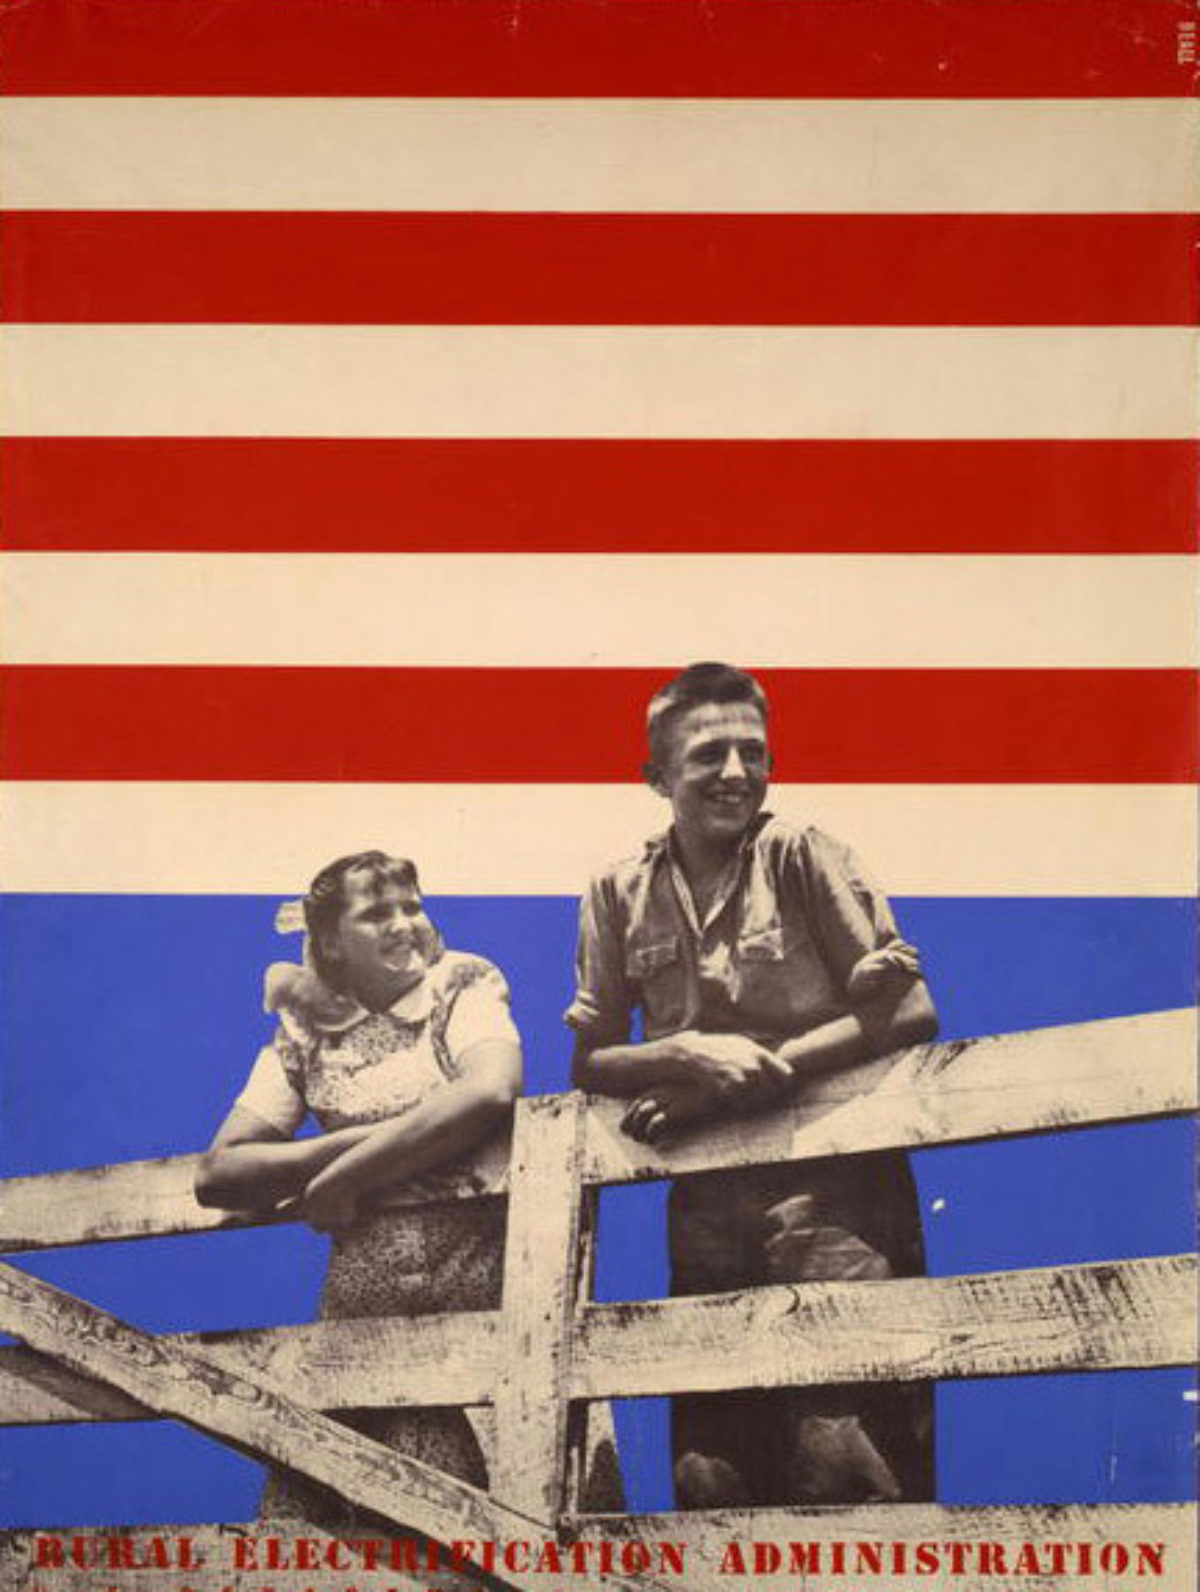 A collage poster of 2 people leaning on a fence with blue red and white stripes in the background.